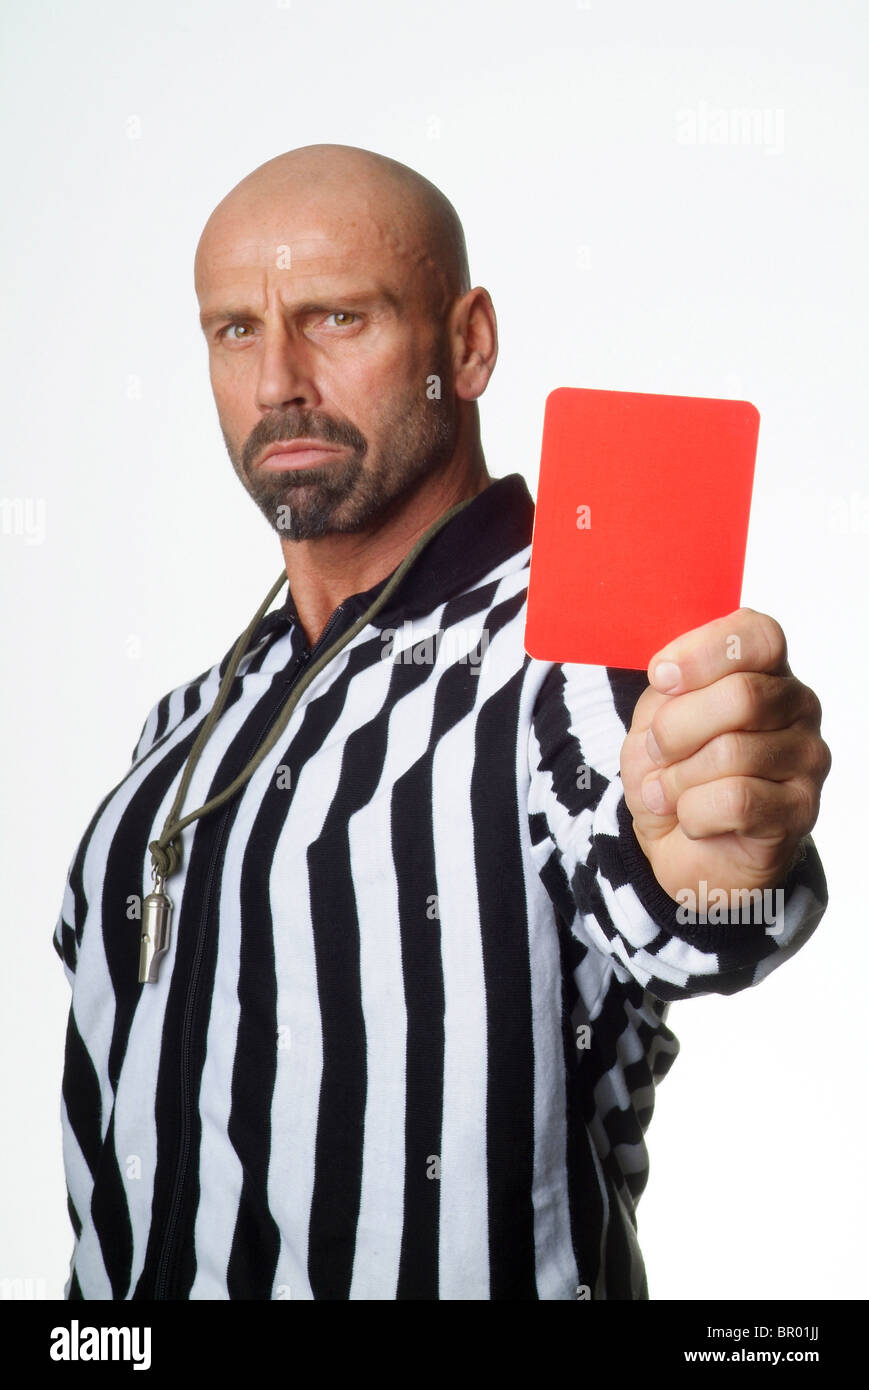 Referee giving a red card Stock Photo - Alamy